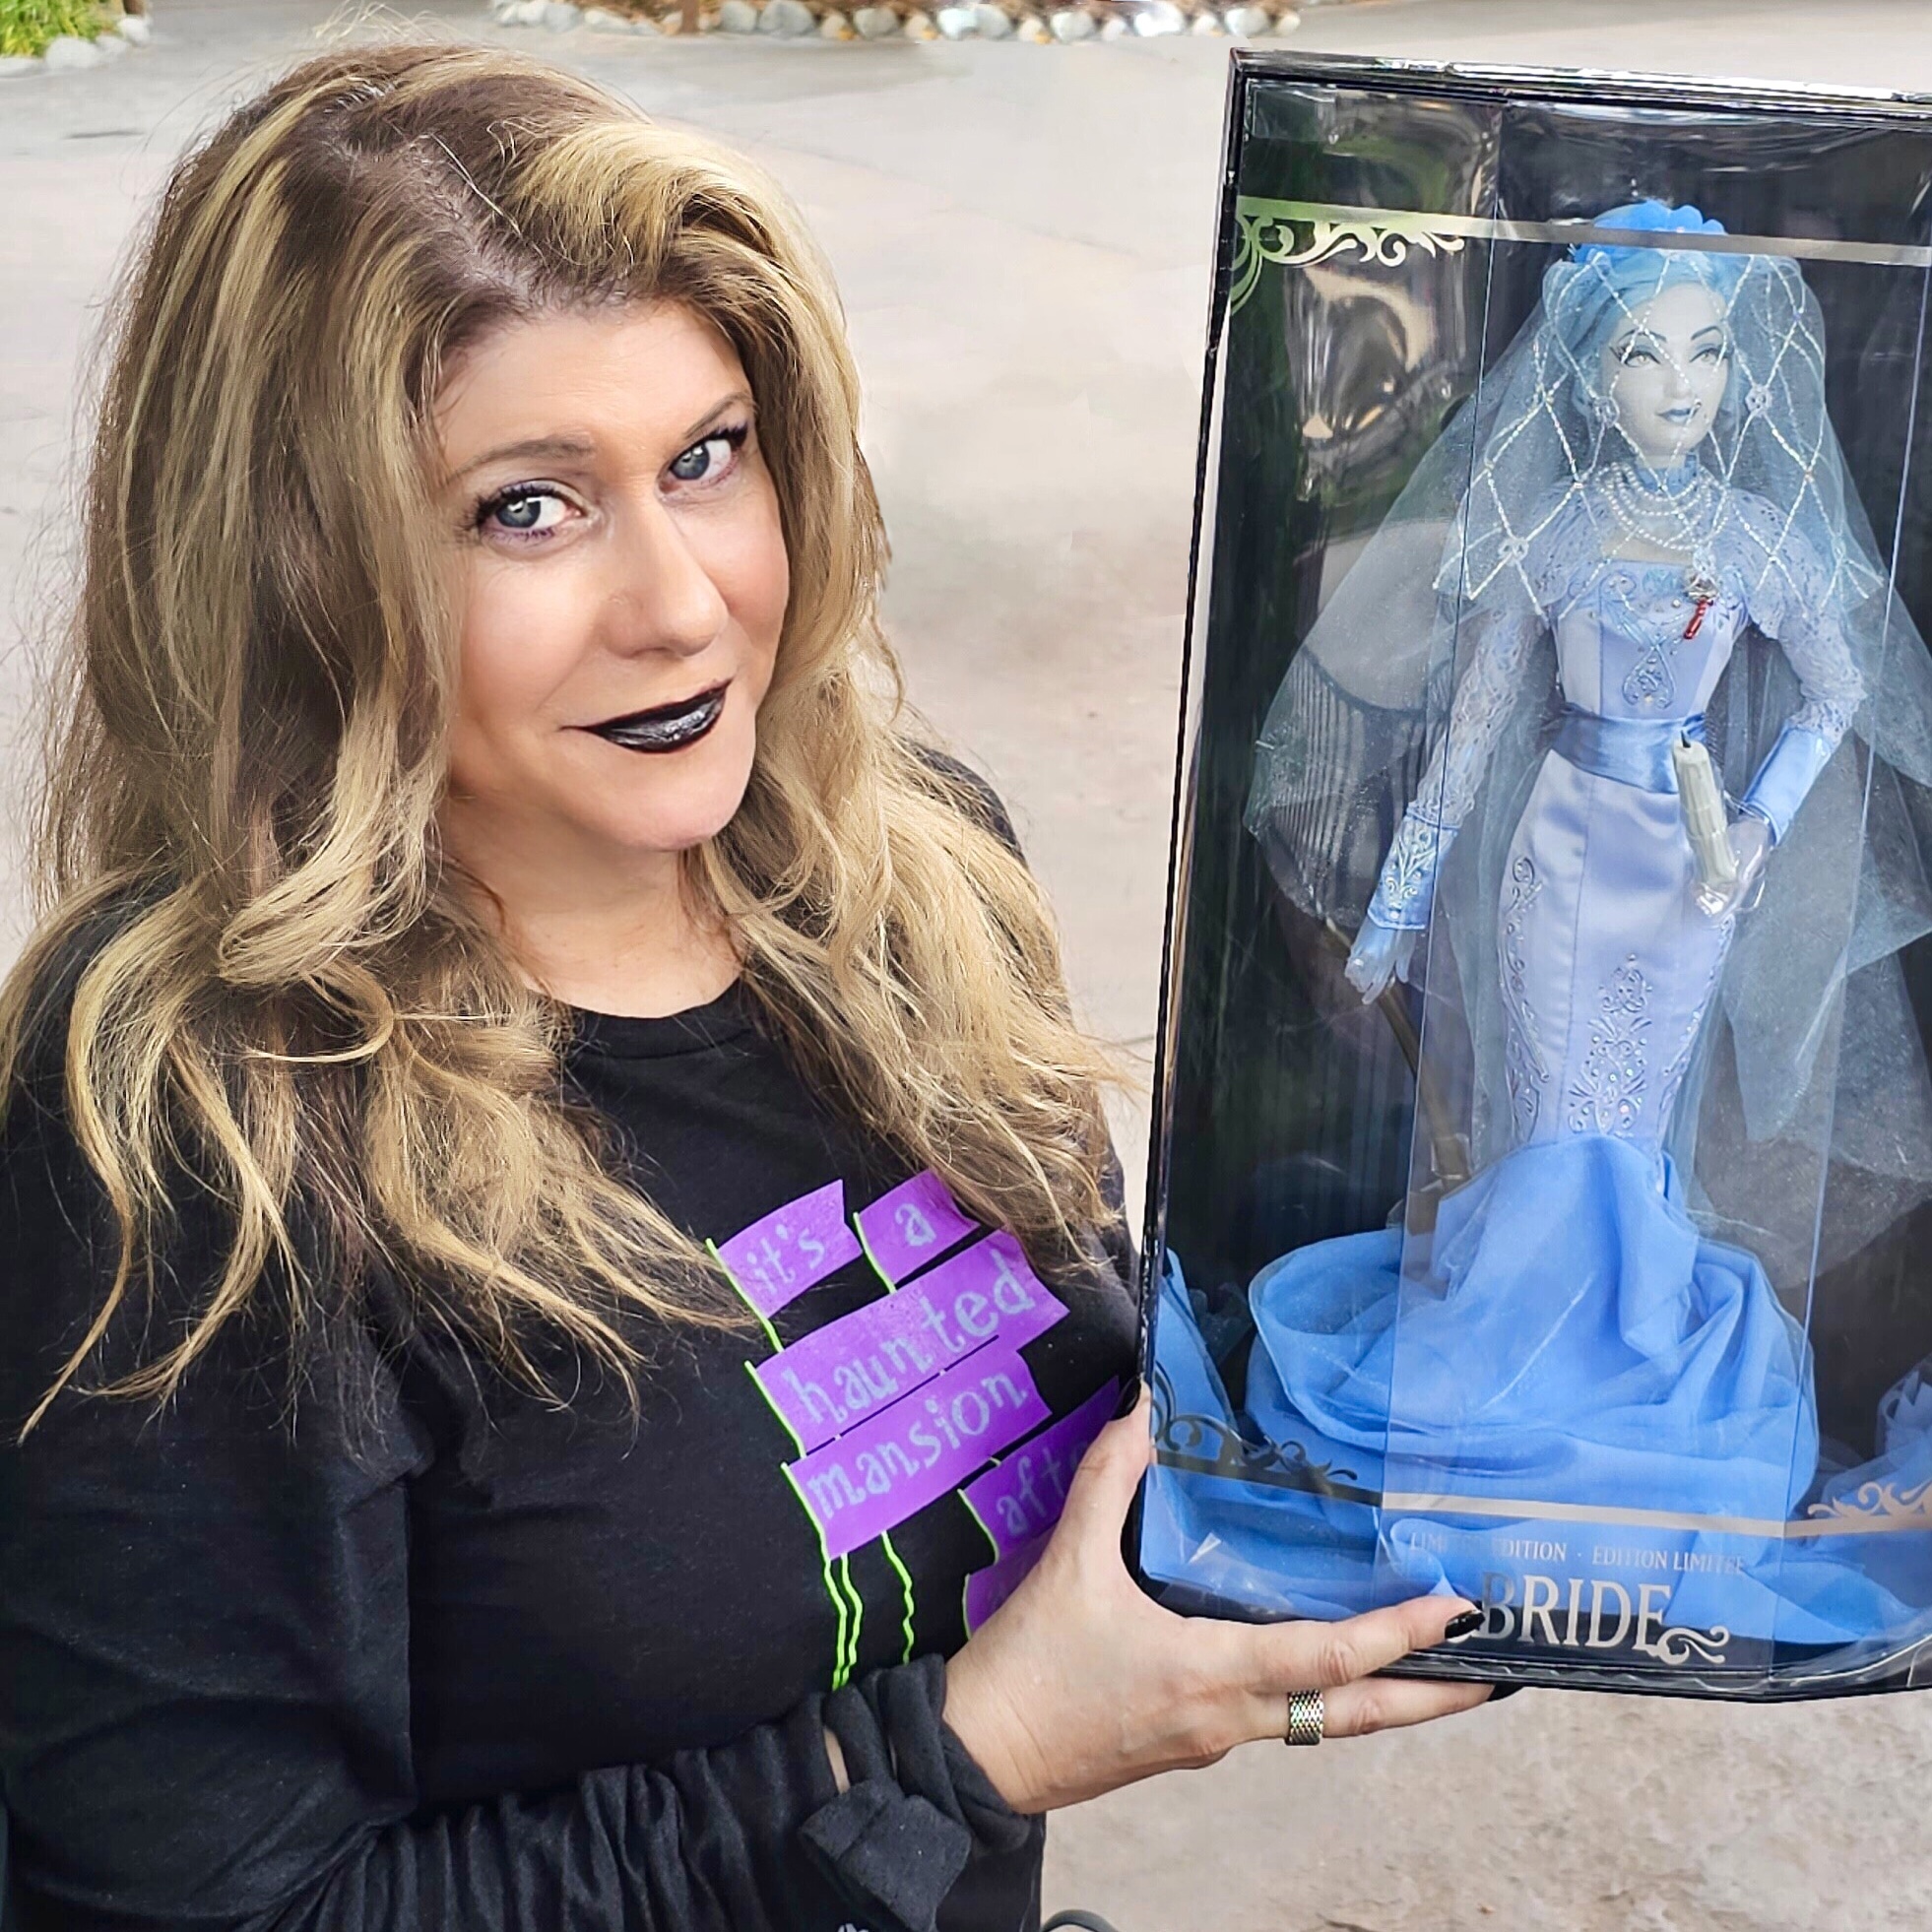 Kat Cressida The Haunted Mansion Bride herself poses With Constance Hatchaway doll at Disneyland